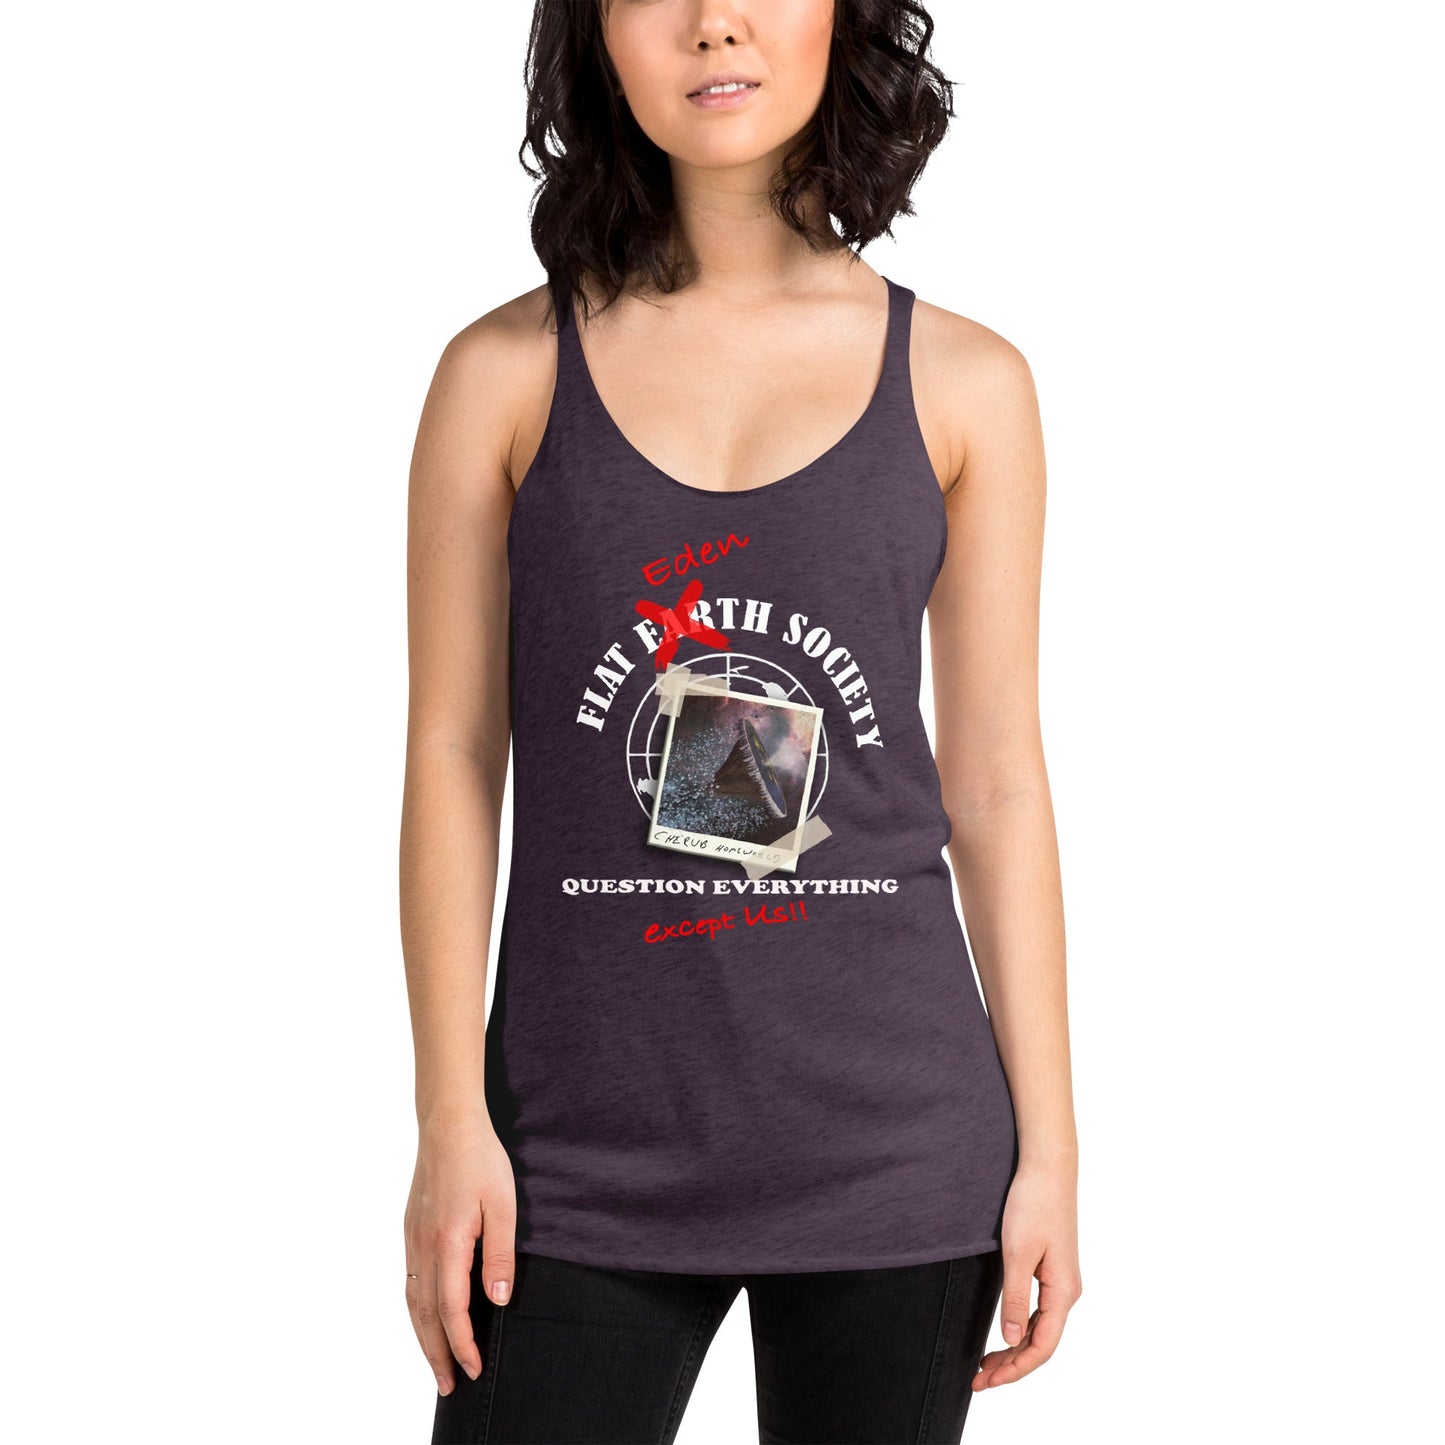 Women's Racerback Tank | Intergalactic Space Force 2 | Flat Eden Society - Spectral Ink Shop - Shirts & Tops -2753985_6661